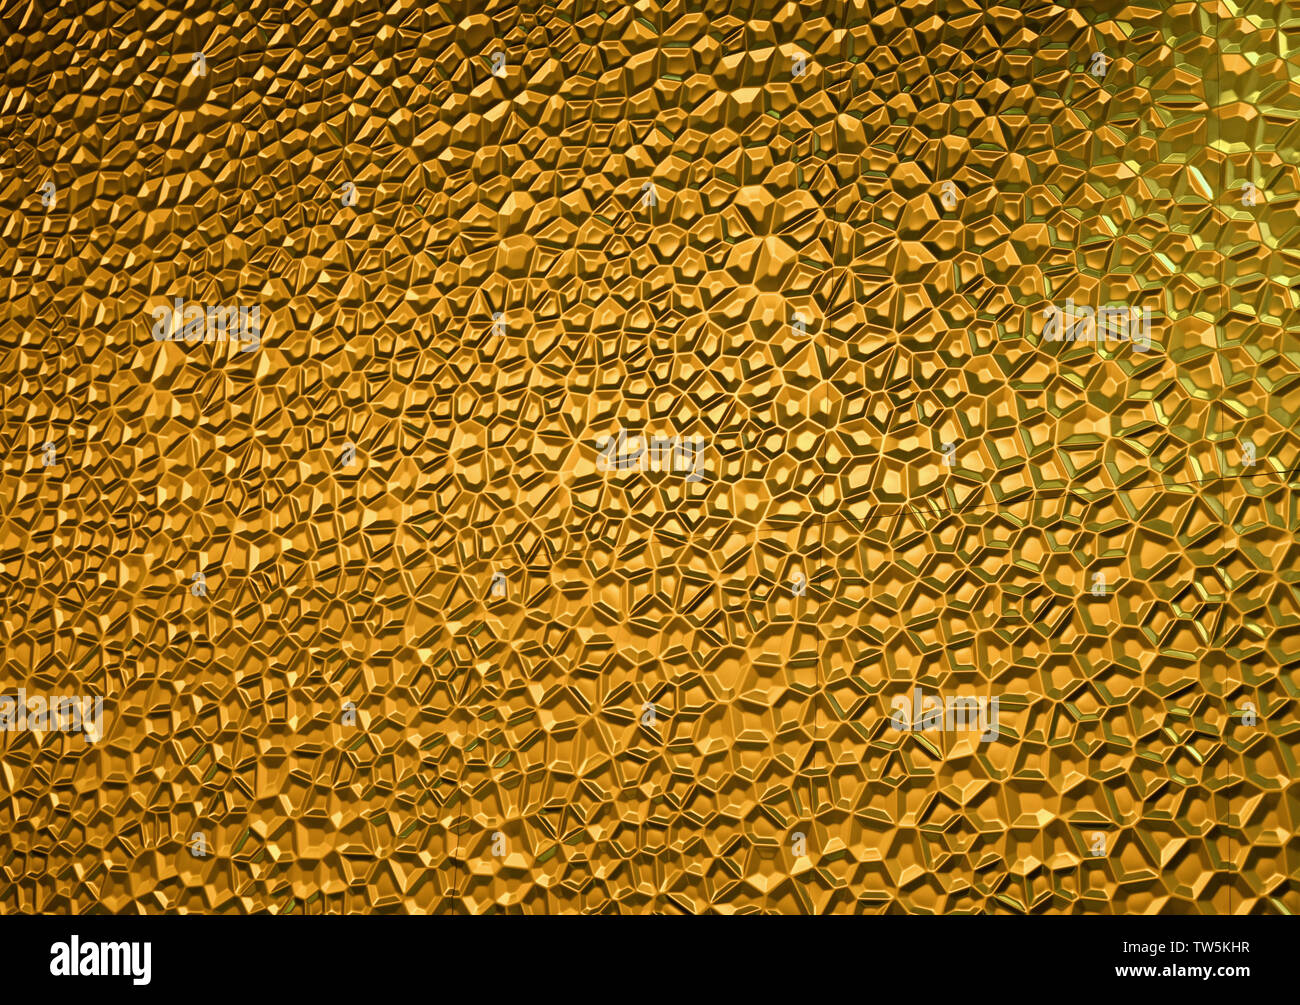 Golden hairy glass background material Stock Photo